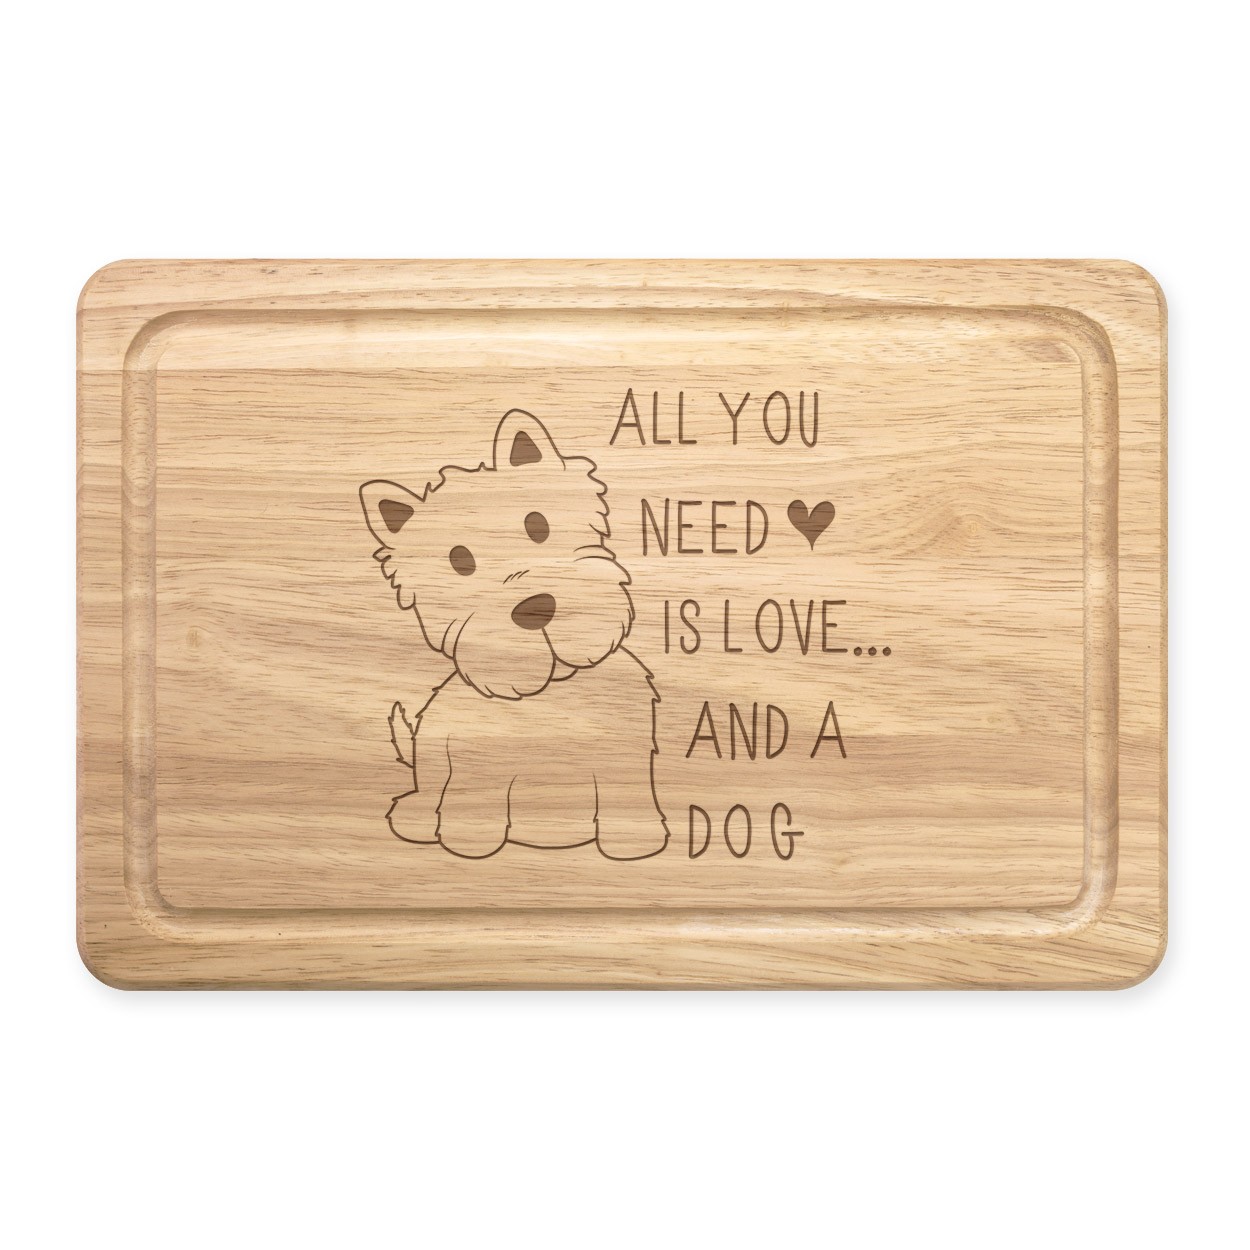 All You Need Is Love And A Dog Rectangular Wooden Chopping Board